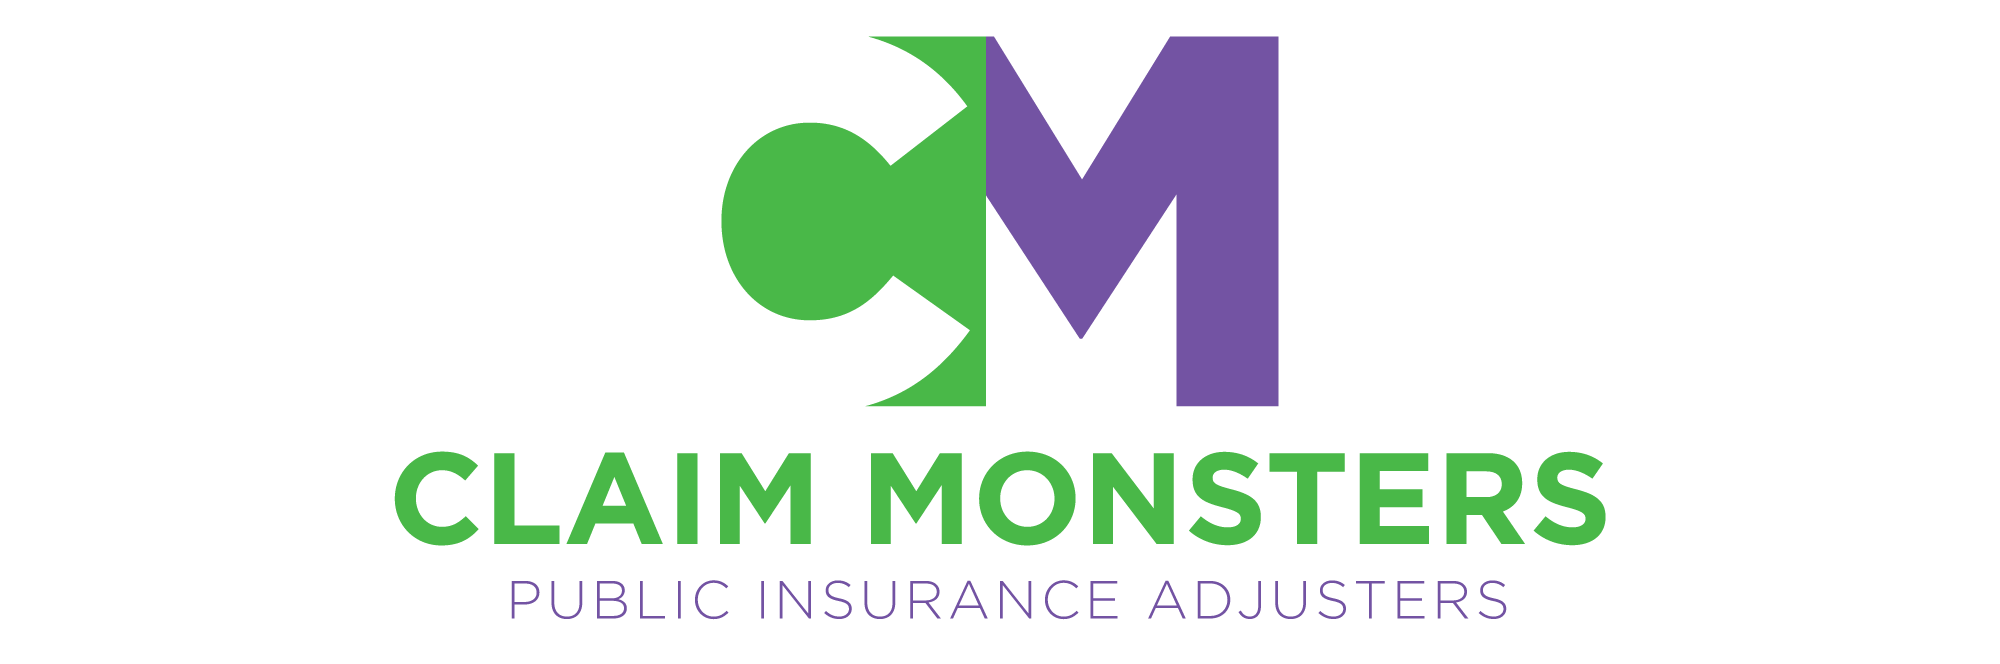 Claim Monsters - Texas Public Insurance Adjusters